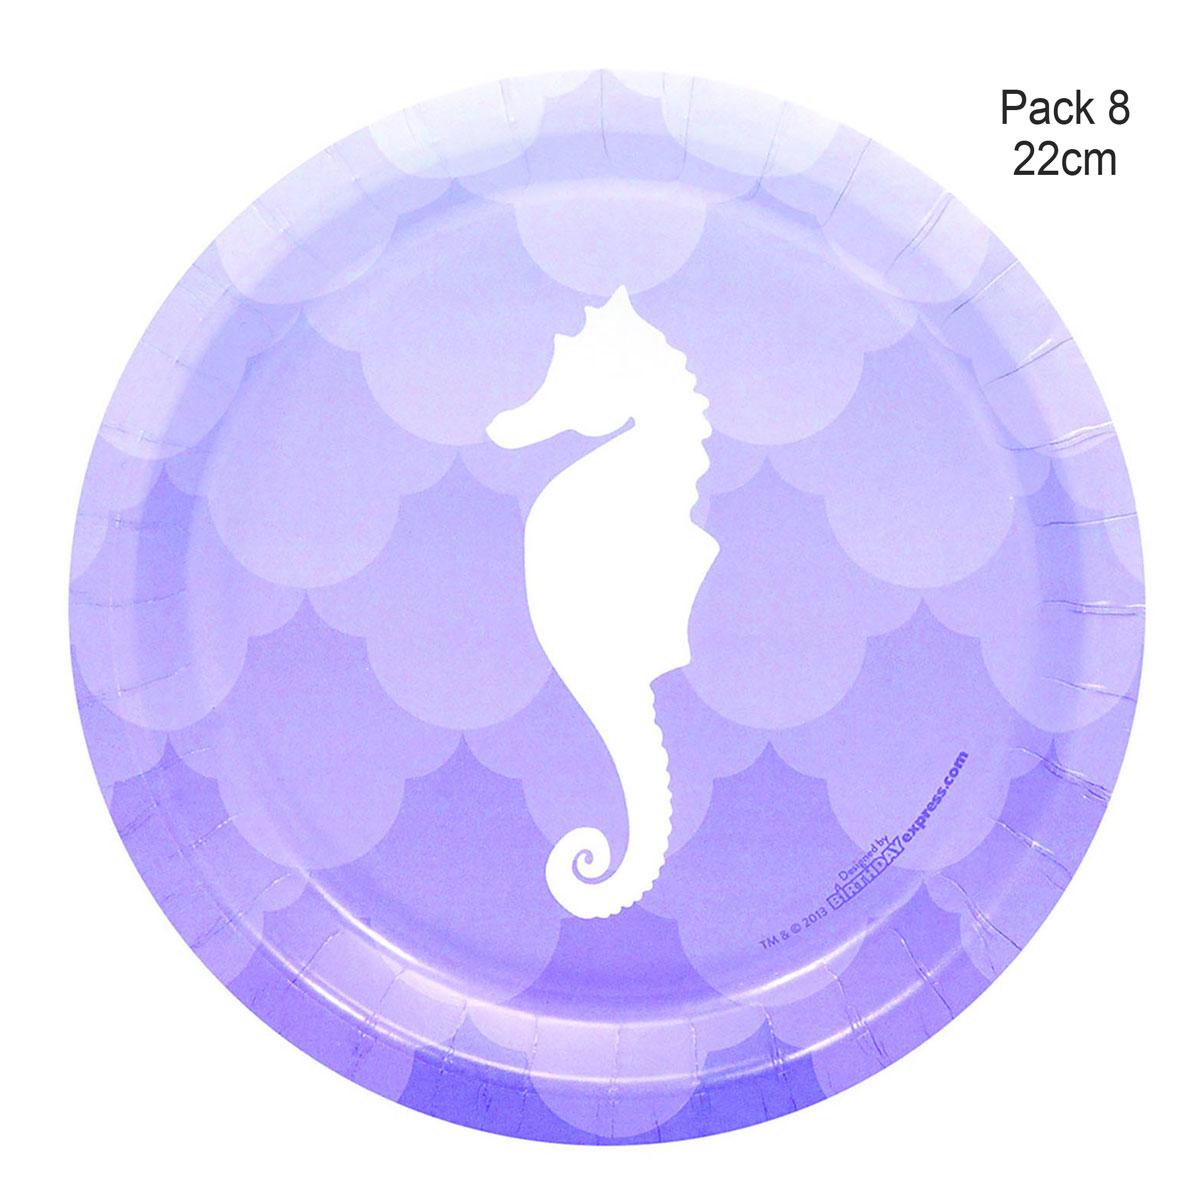 Mermaid Sea Horse Party Paper Plates 17cm pk8 by Forum Novelies 80664 available here at Karnival Costumes online party shop